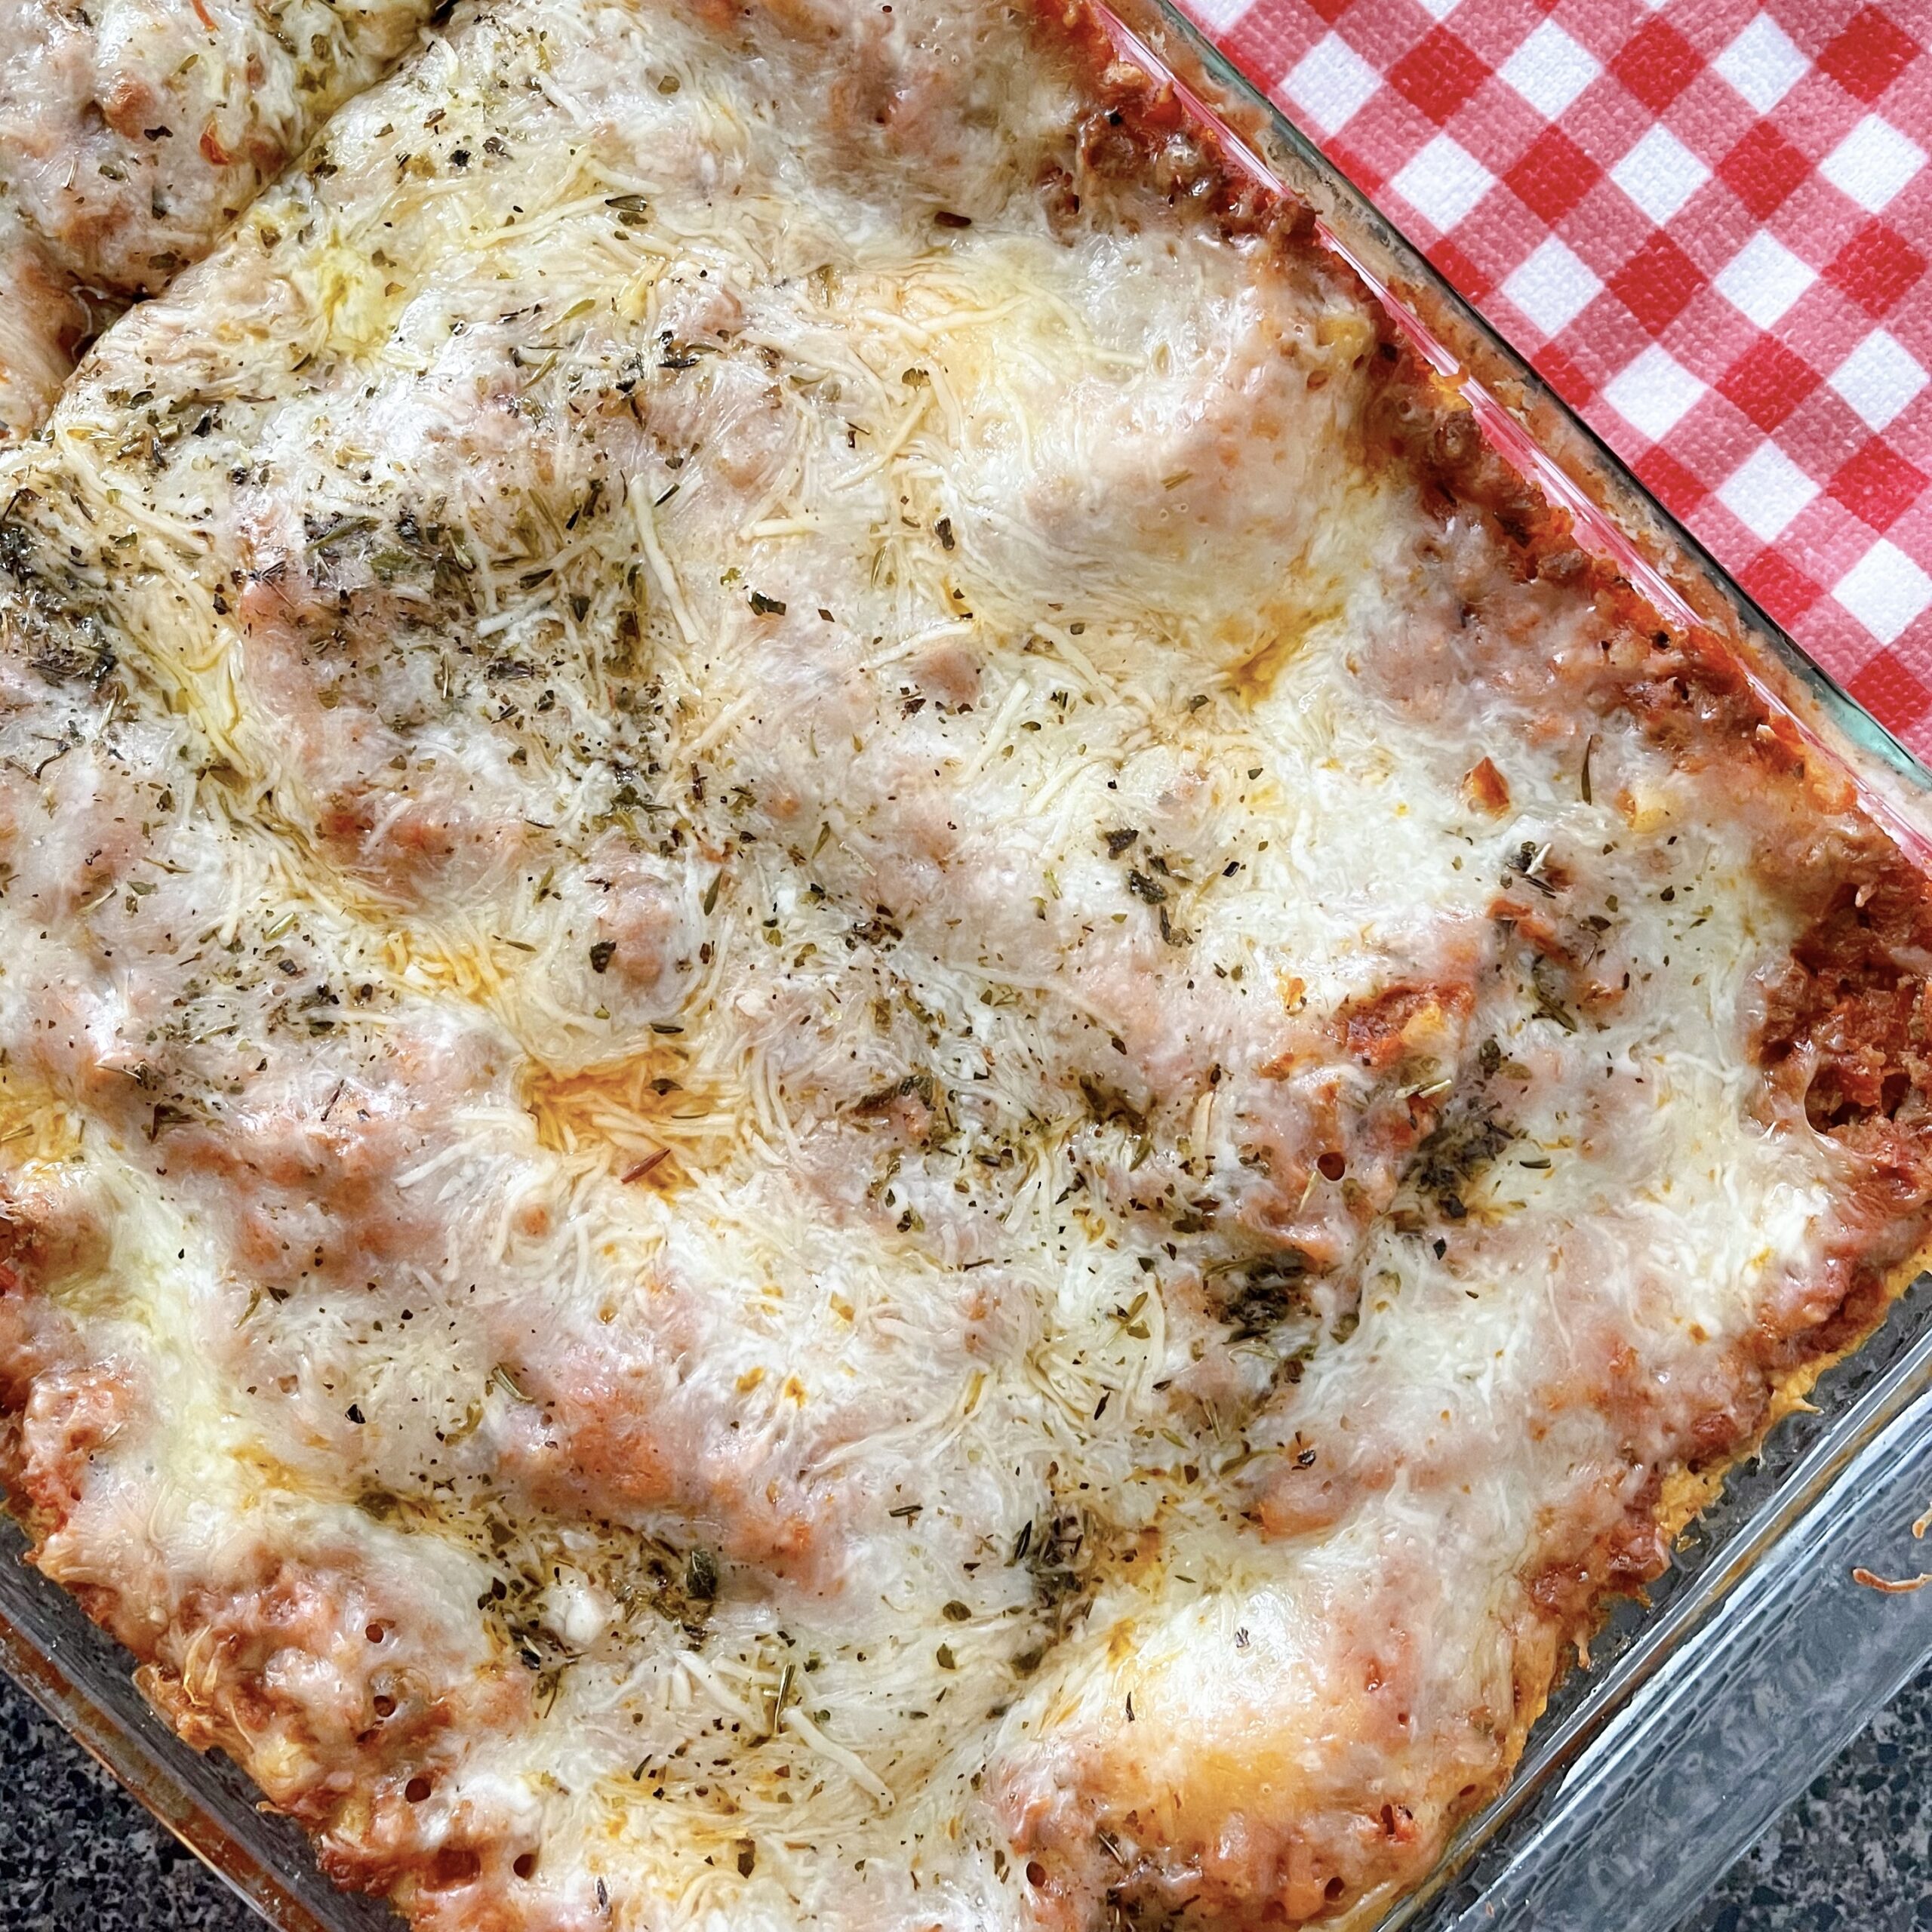 A pan full of lasagna made with ricotta cheese.